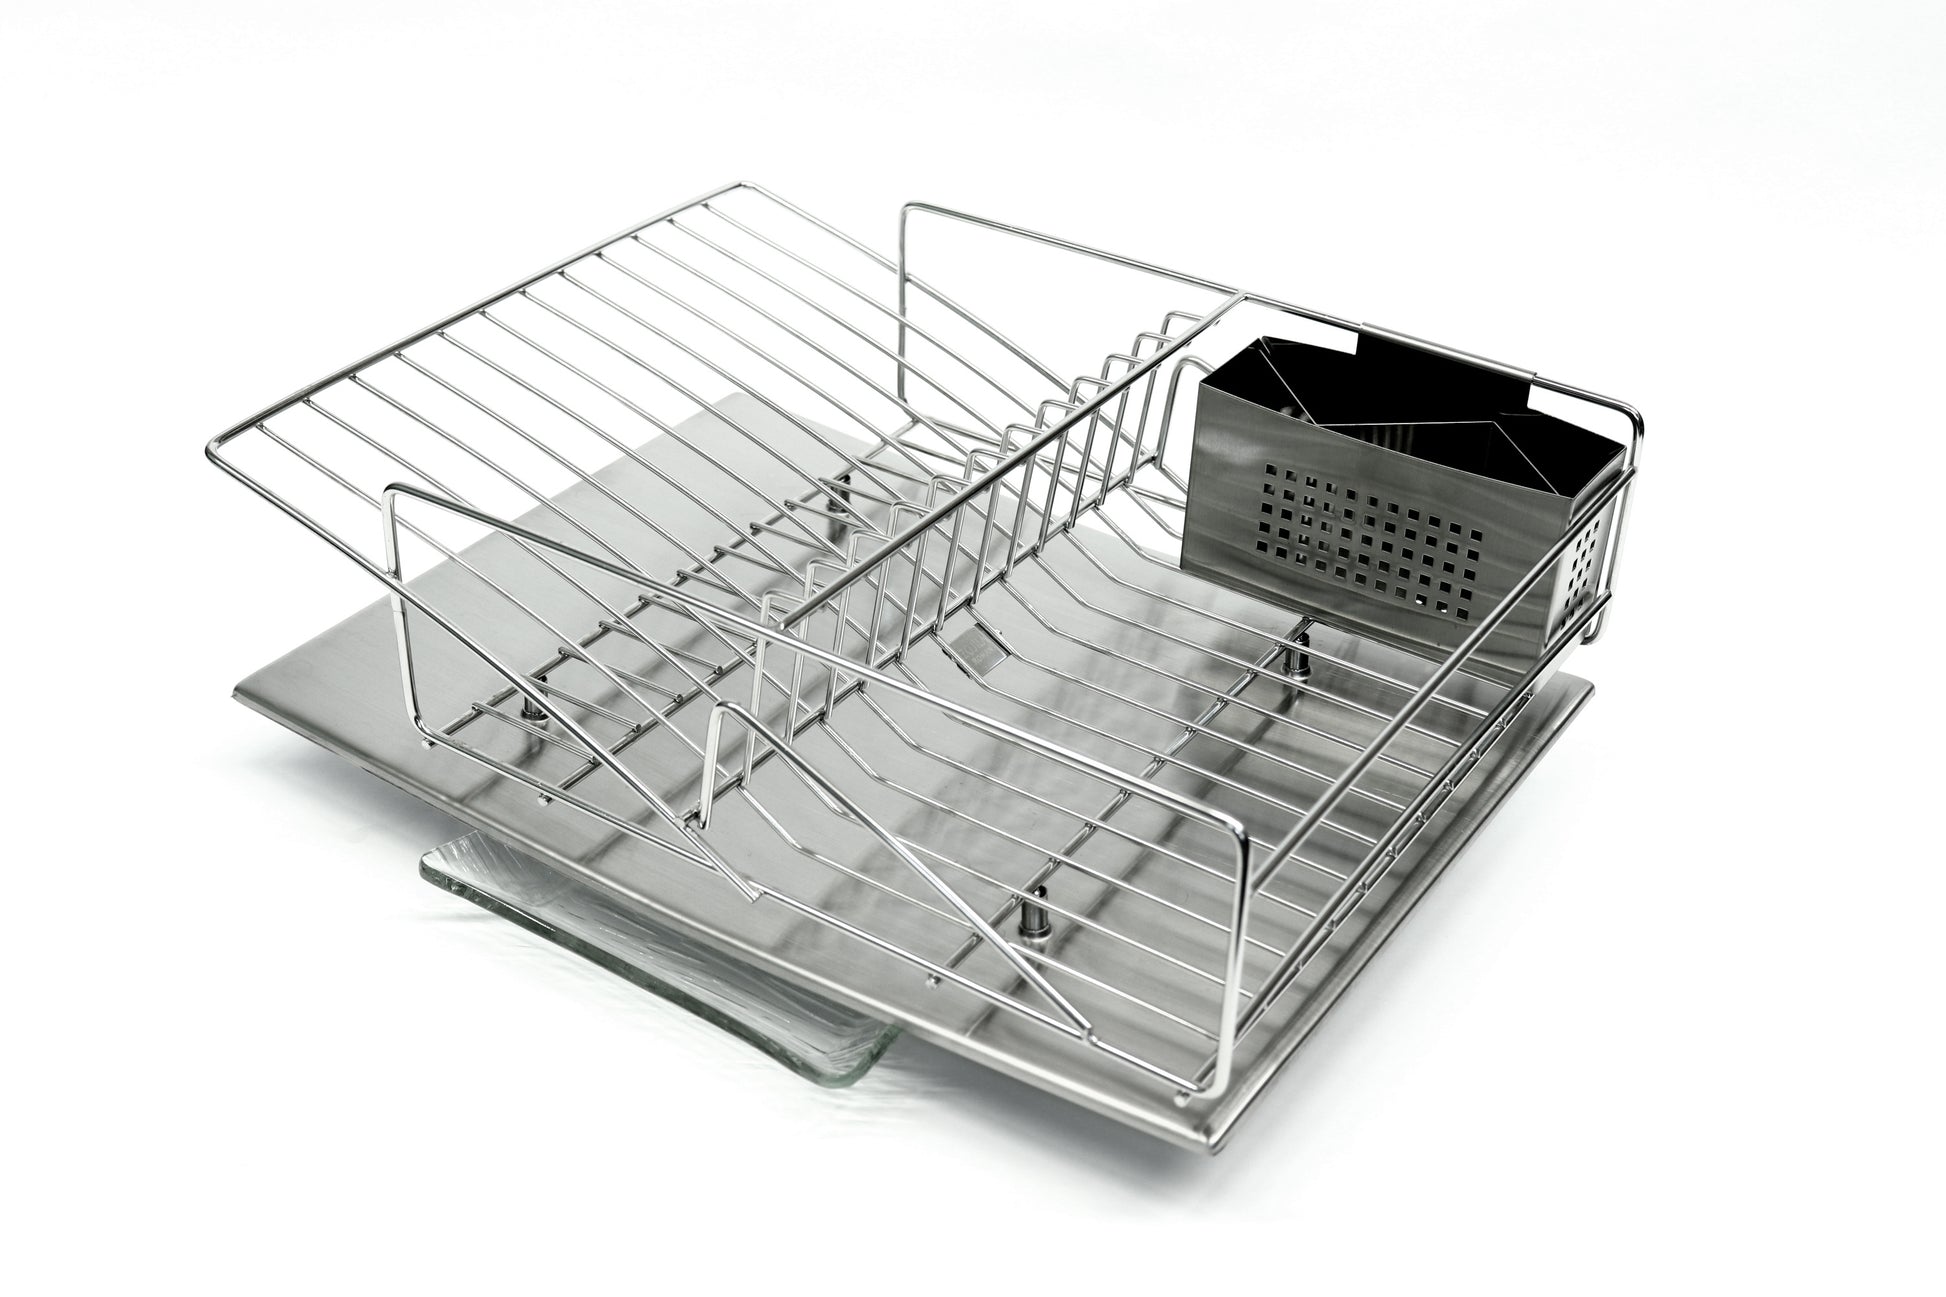 Dish Drying Rack, 3 Tier Dish Rack with Tray,Dish Drainer with Drainboard  and Utensil Holder Large Capacity for Kitchen Countertop Saving Space(Black 3  Tier) price in Saudi Arabia,  Saudi Arabia